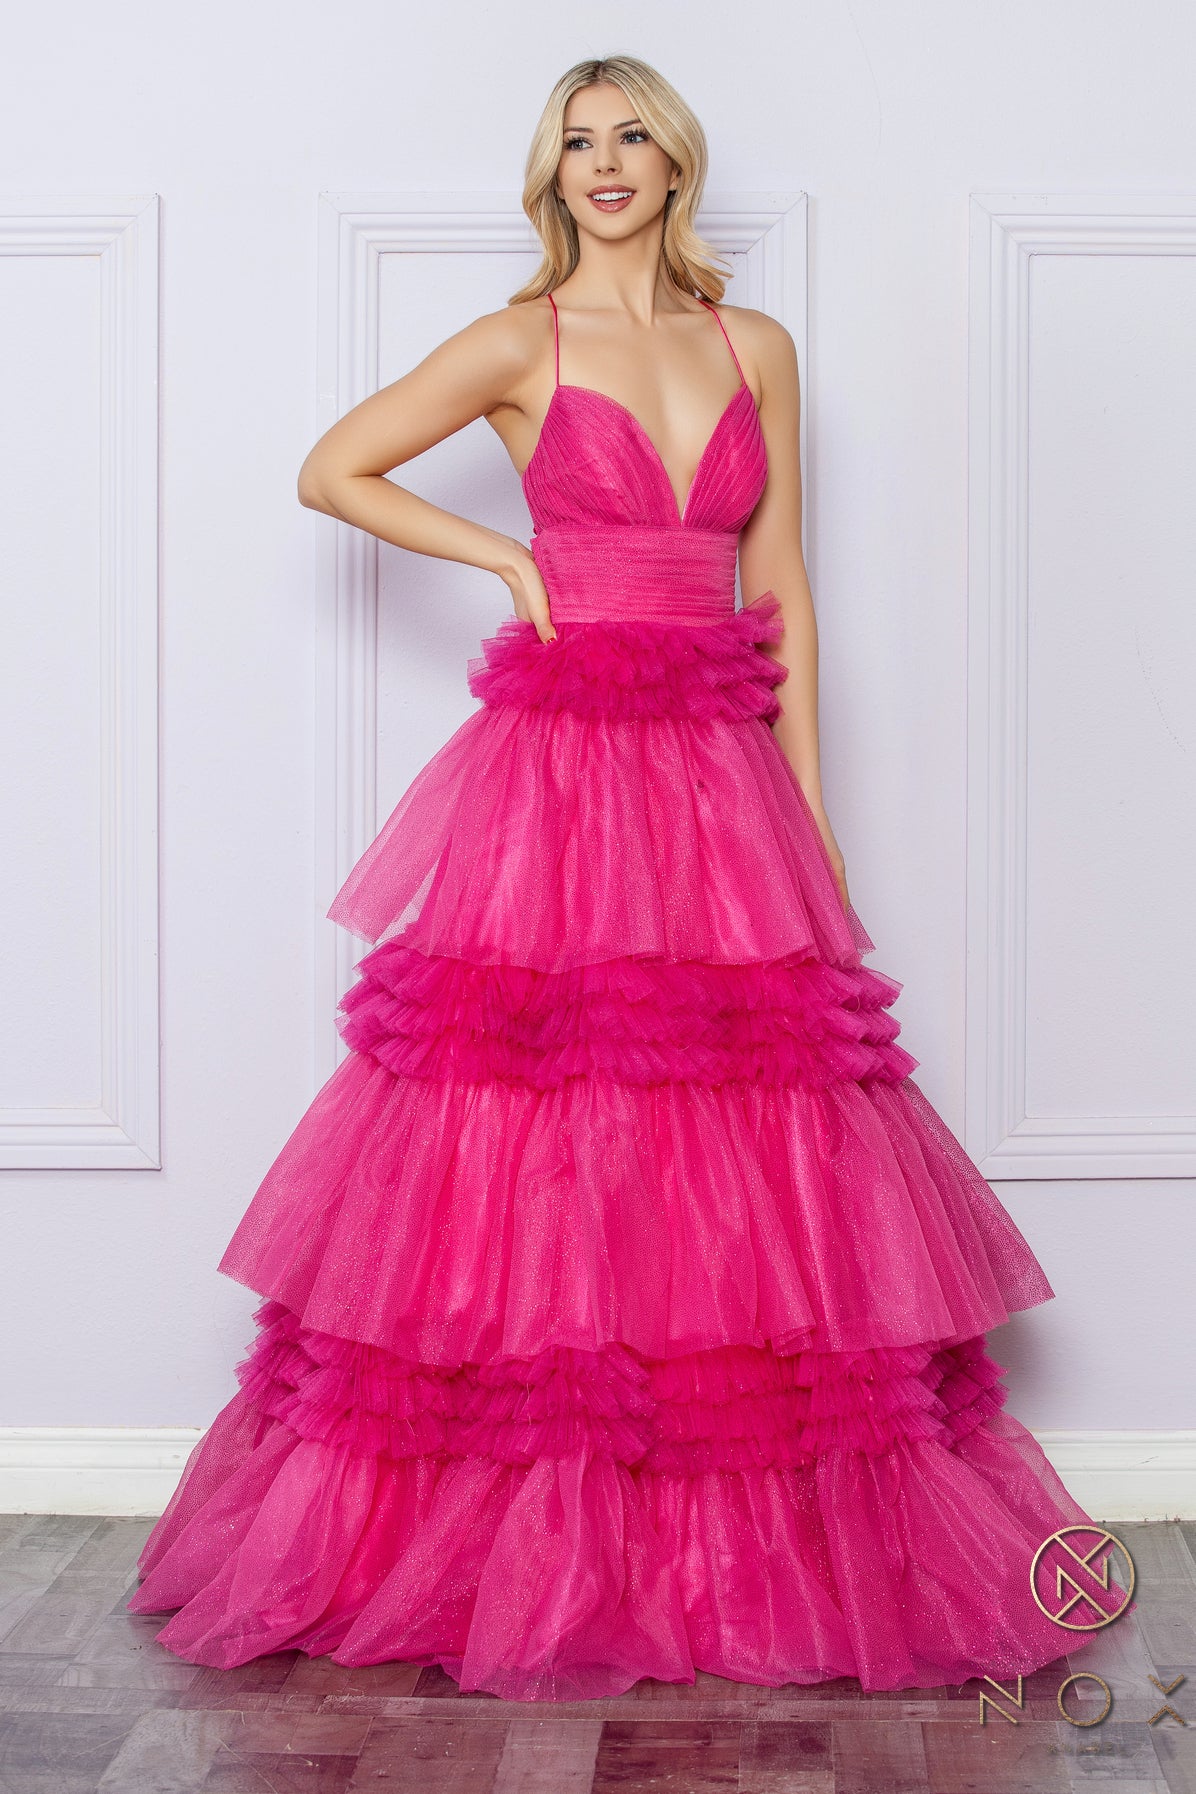 Nox Anabel R1316 A Line Pleated Shimmer Ballgown Prom Dress Layered Tulle Ruffle Corset Formal Gown